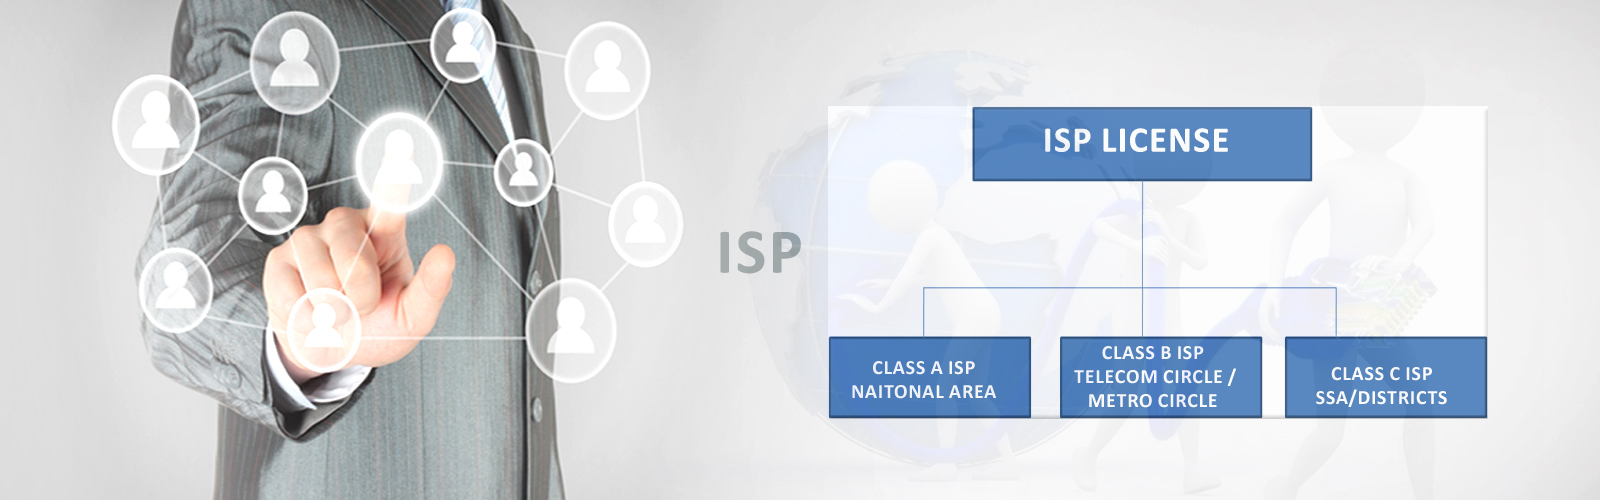 What is ISP License